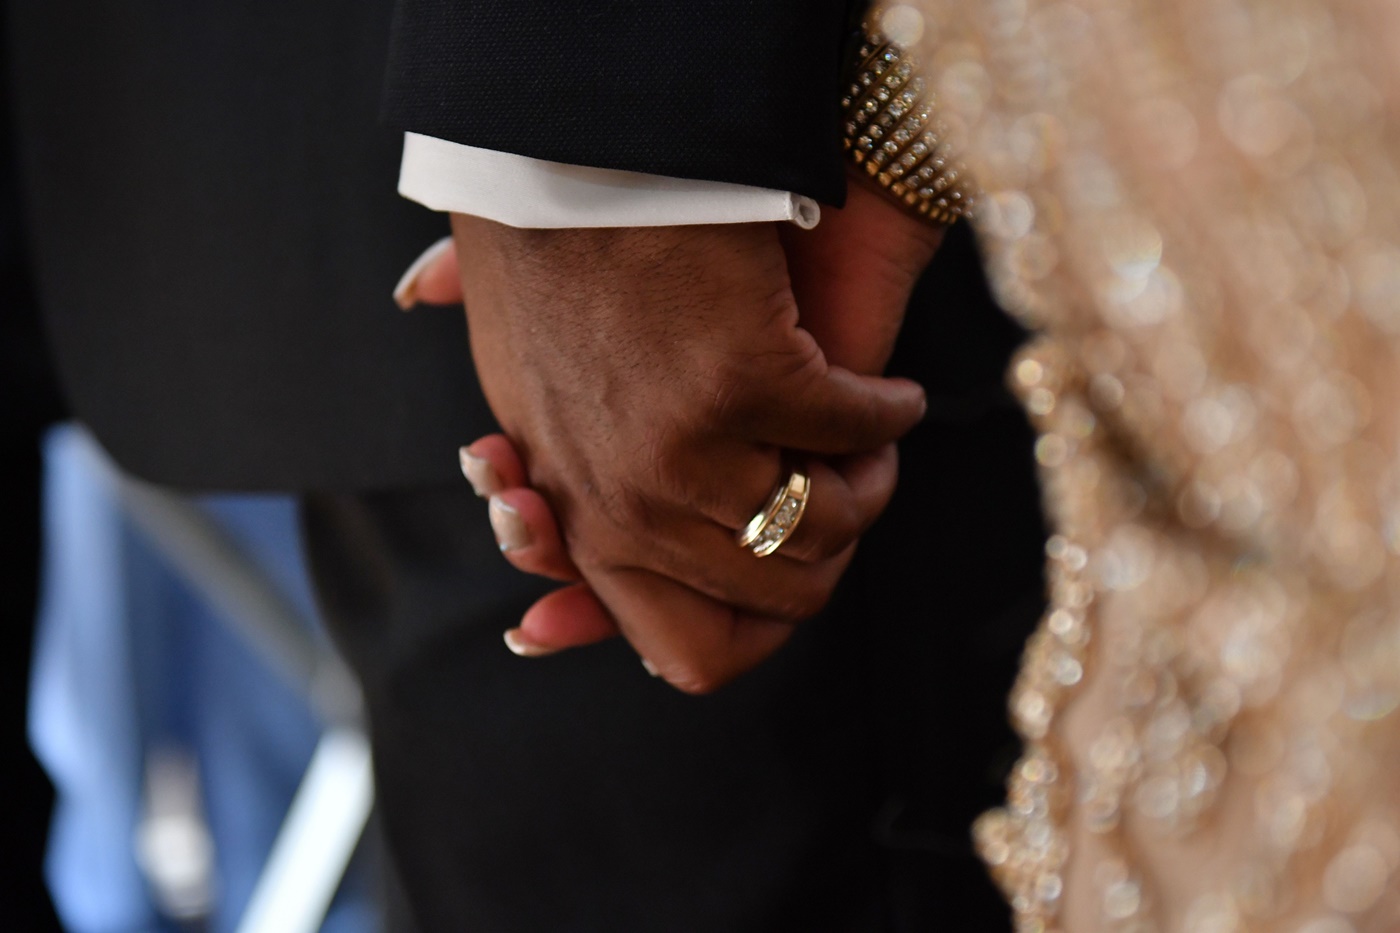 Couple's Hands with Wedding Bands